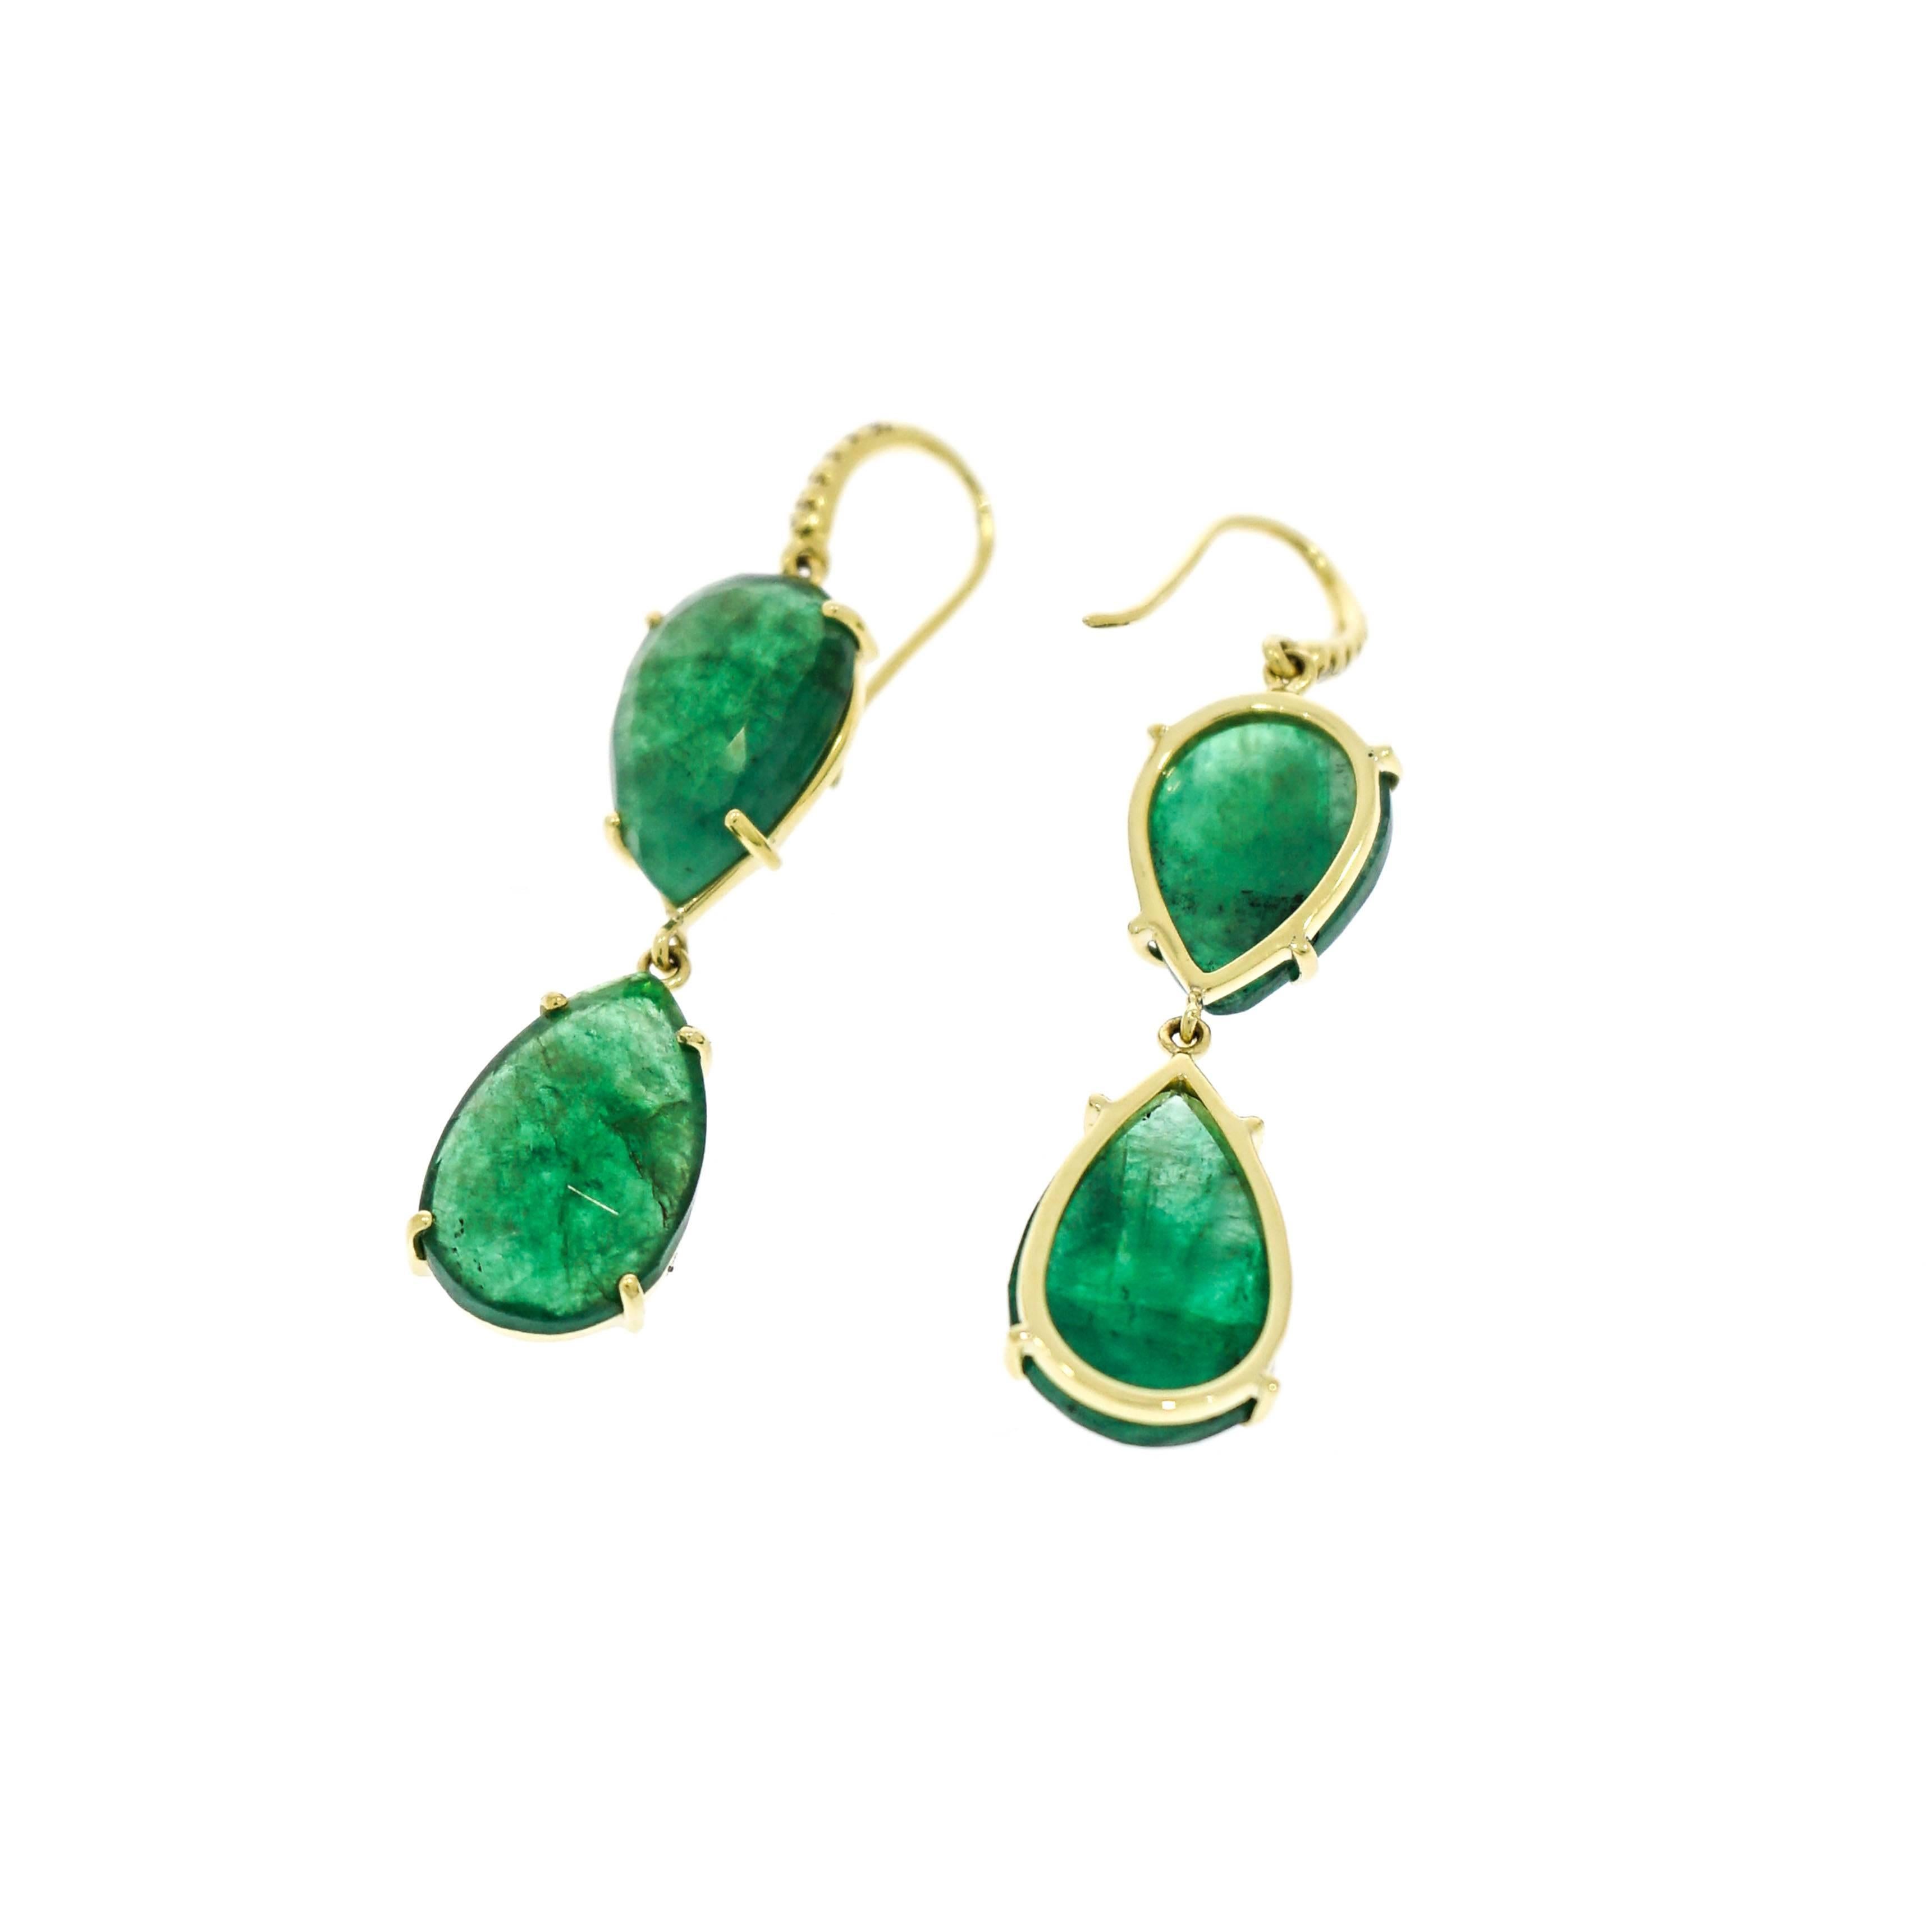 Emerald symbolize rebirth and evoque the freshness of nature... Lauren K designed this pair of Emerald Earrings based on her passion for color, shapes and finding one-of-a-kind stones. 
Handcrafted in 18k yellow gold this less than perfect Emerald